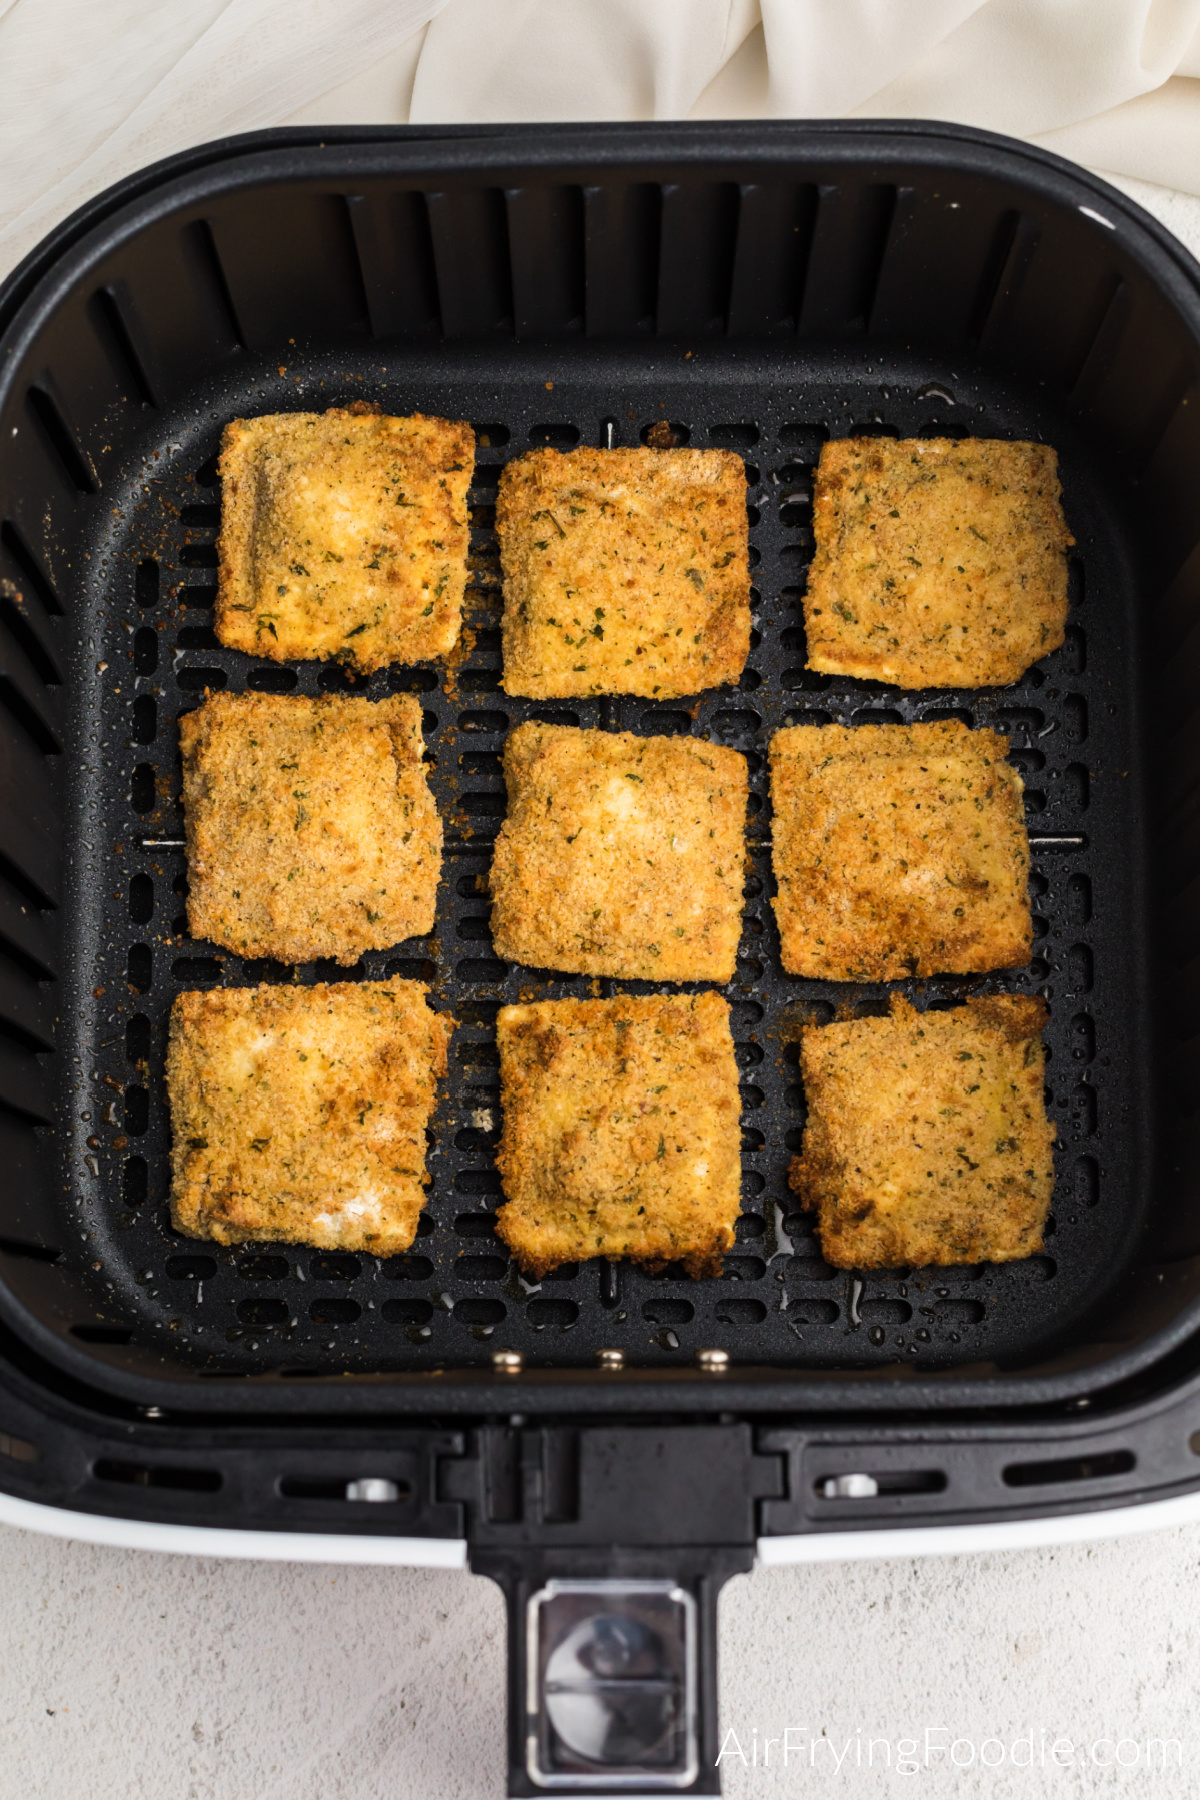 Fully cooked fried Ravioli in the basket of the air fryer. 